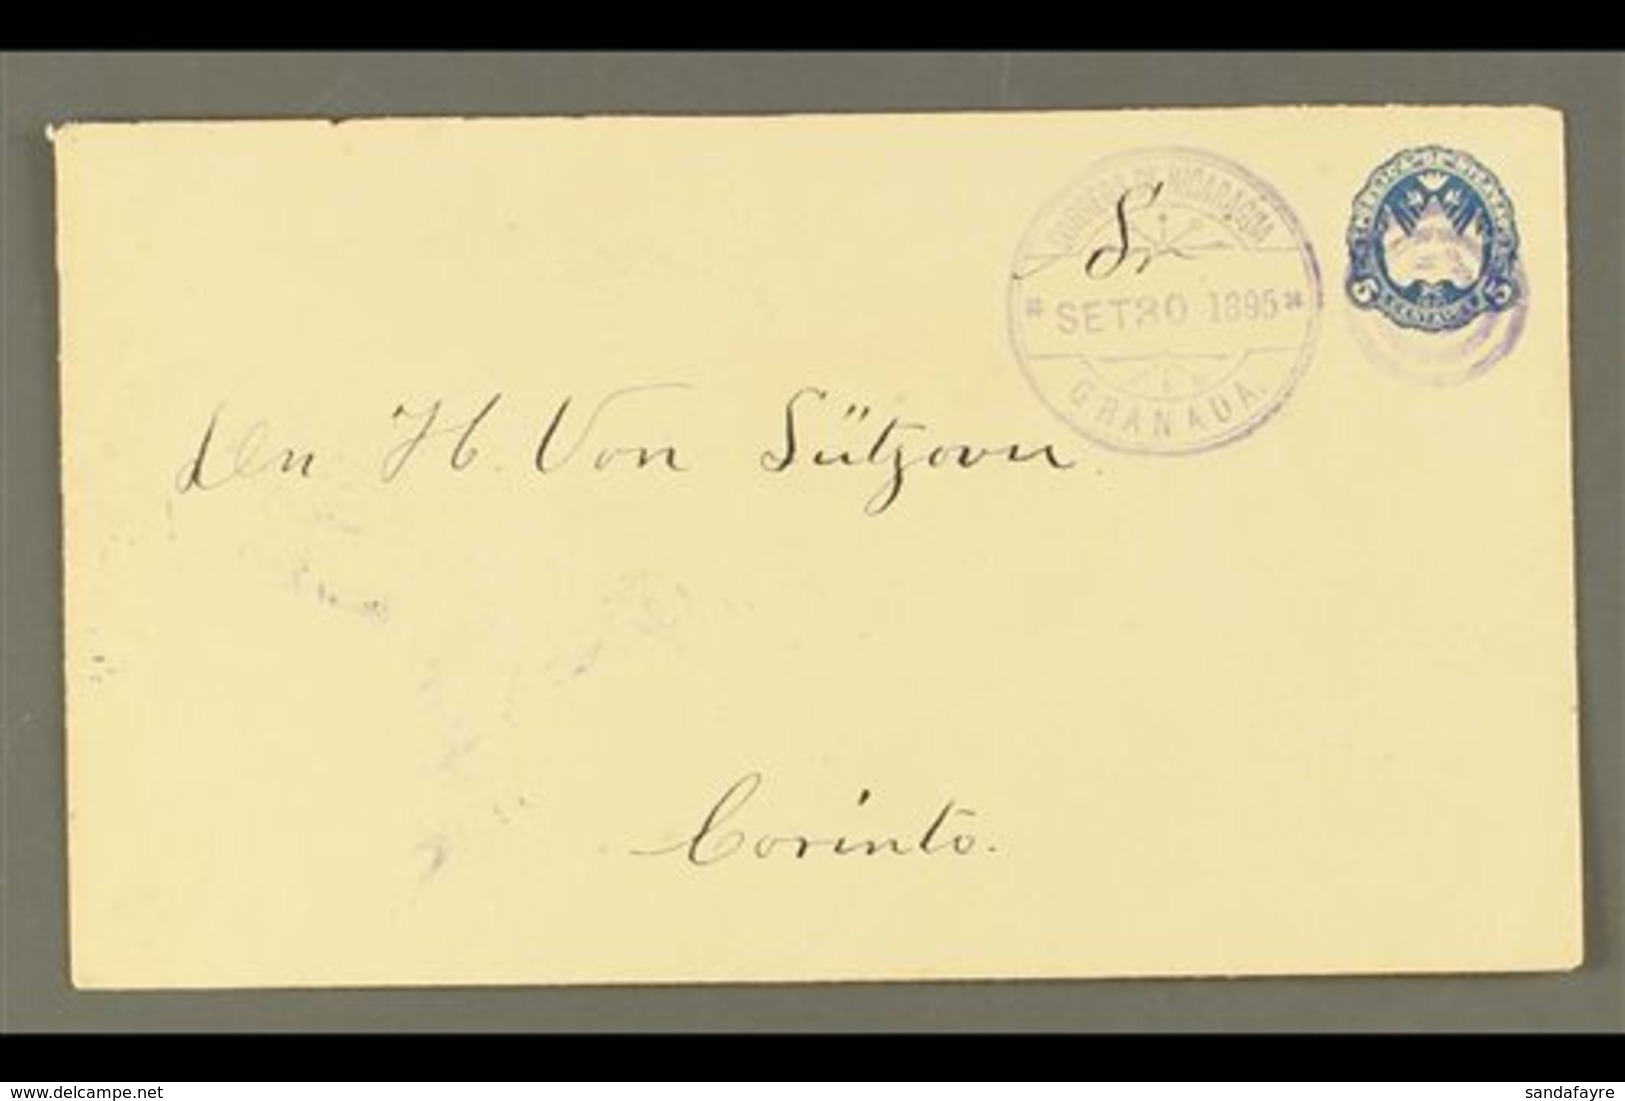 POSTAL STATIONERY 1895 5c Blue Envelope, H&G 29, Very Fine Commercially Used With "Granada / 30 SEP 1895" Duplex Cancel, - Nicaragua